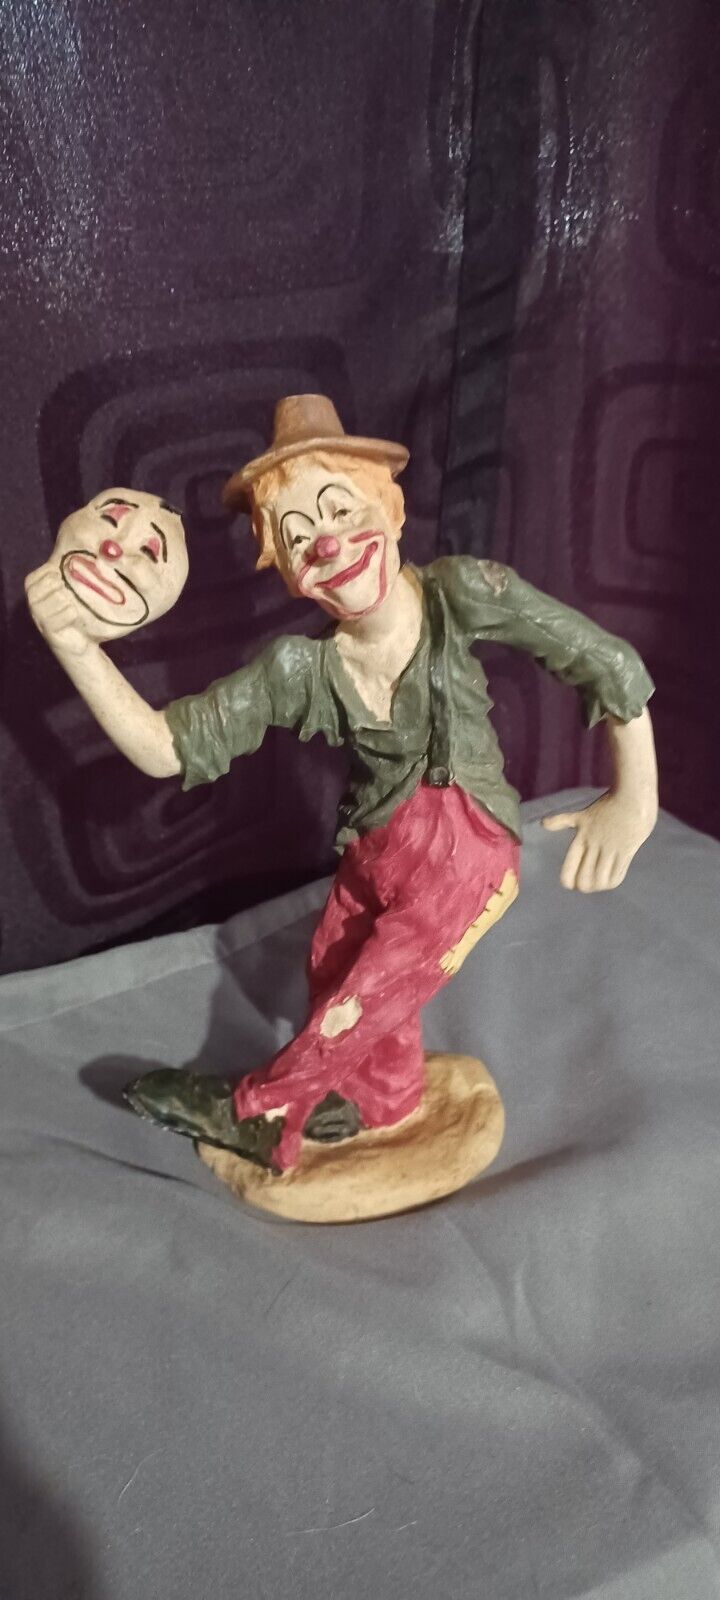 Vintage Collectable Clown Figure 8 inches Tall Good Condition